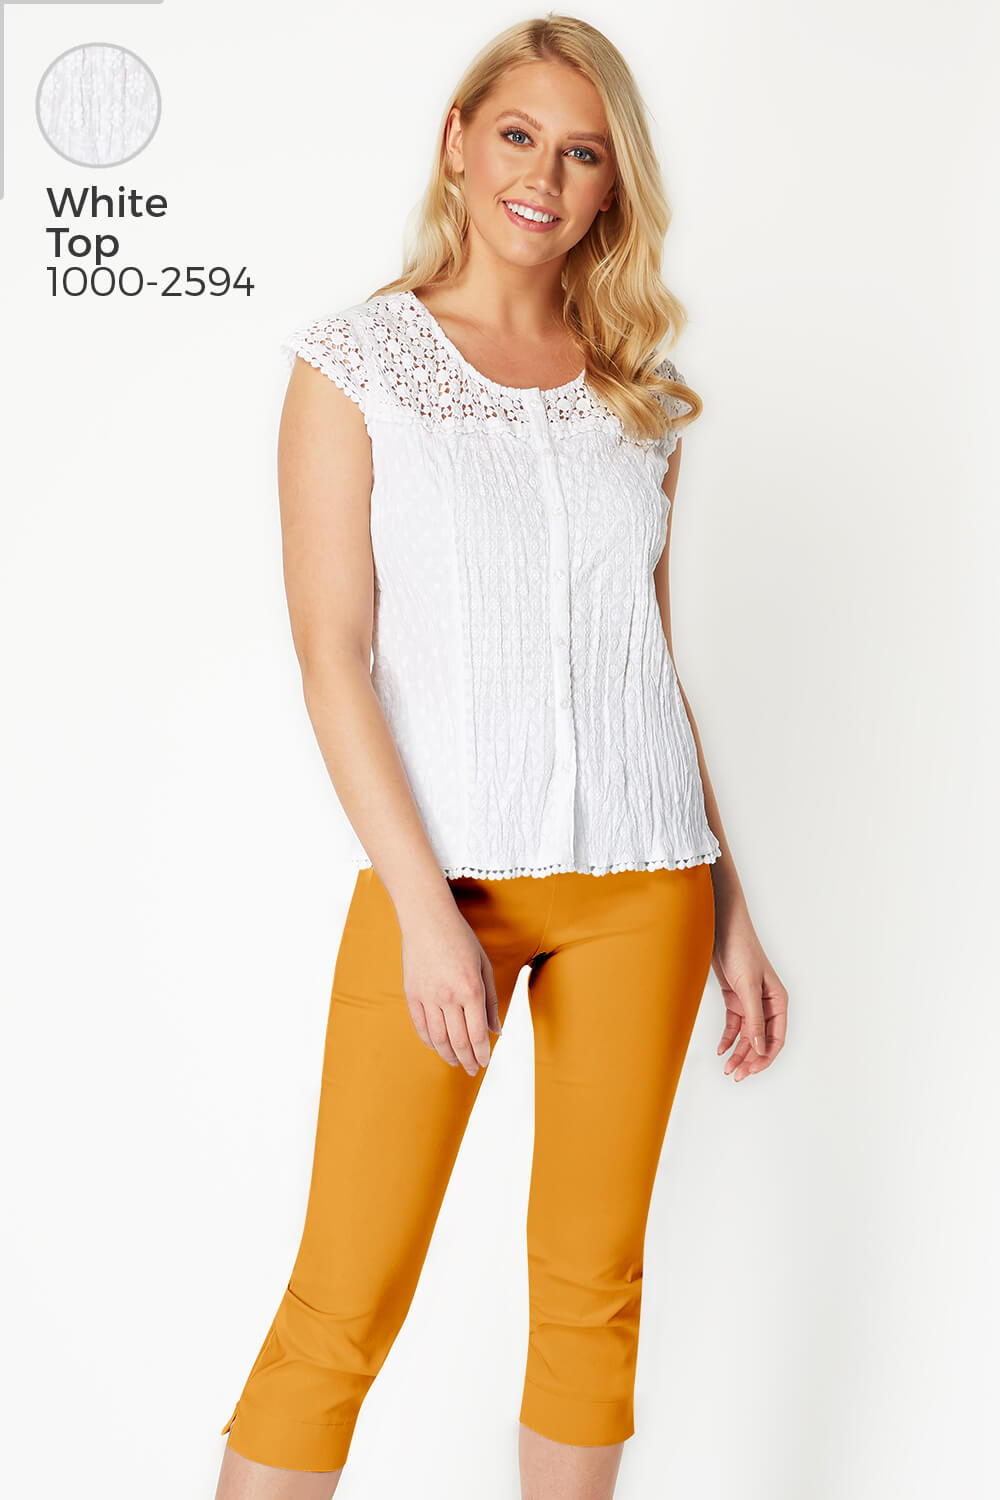 ORANGE Cropped Stretch Trouser, Image 7 of 7